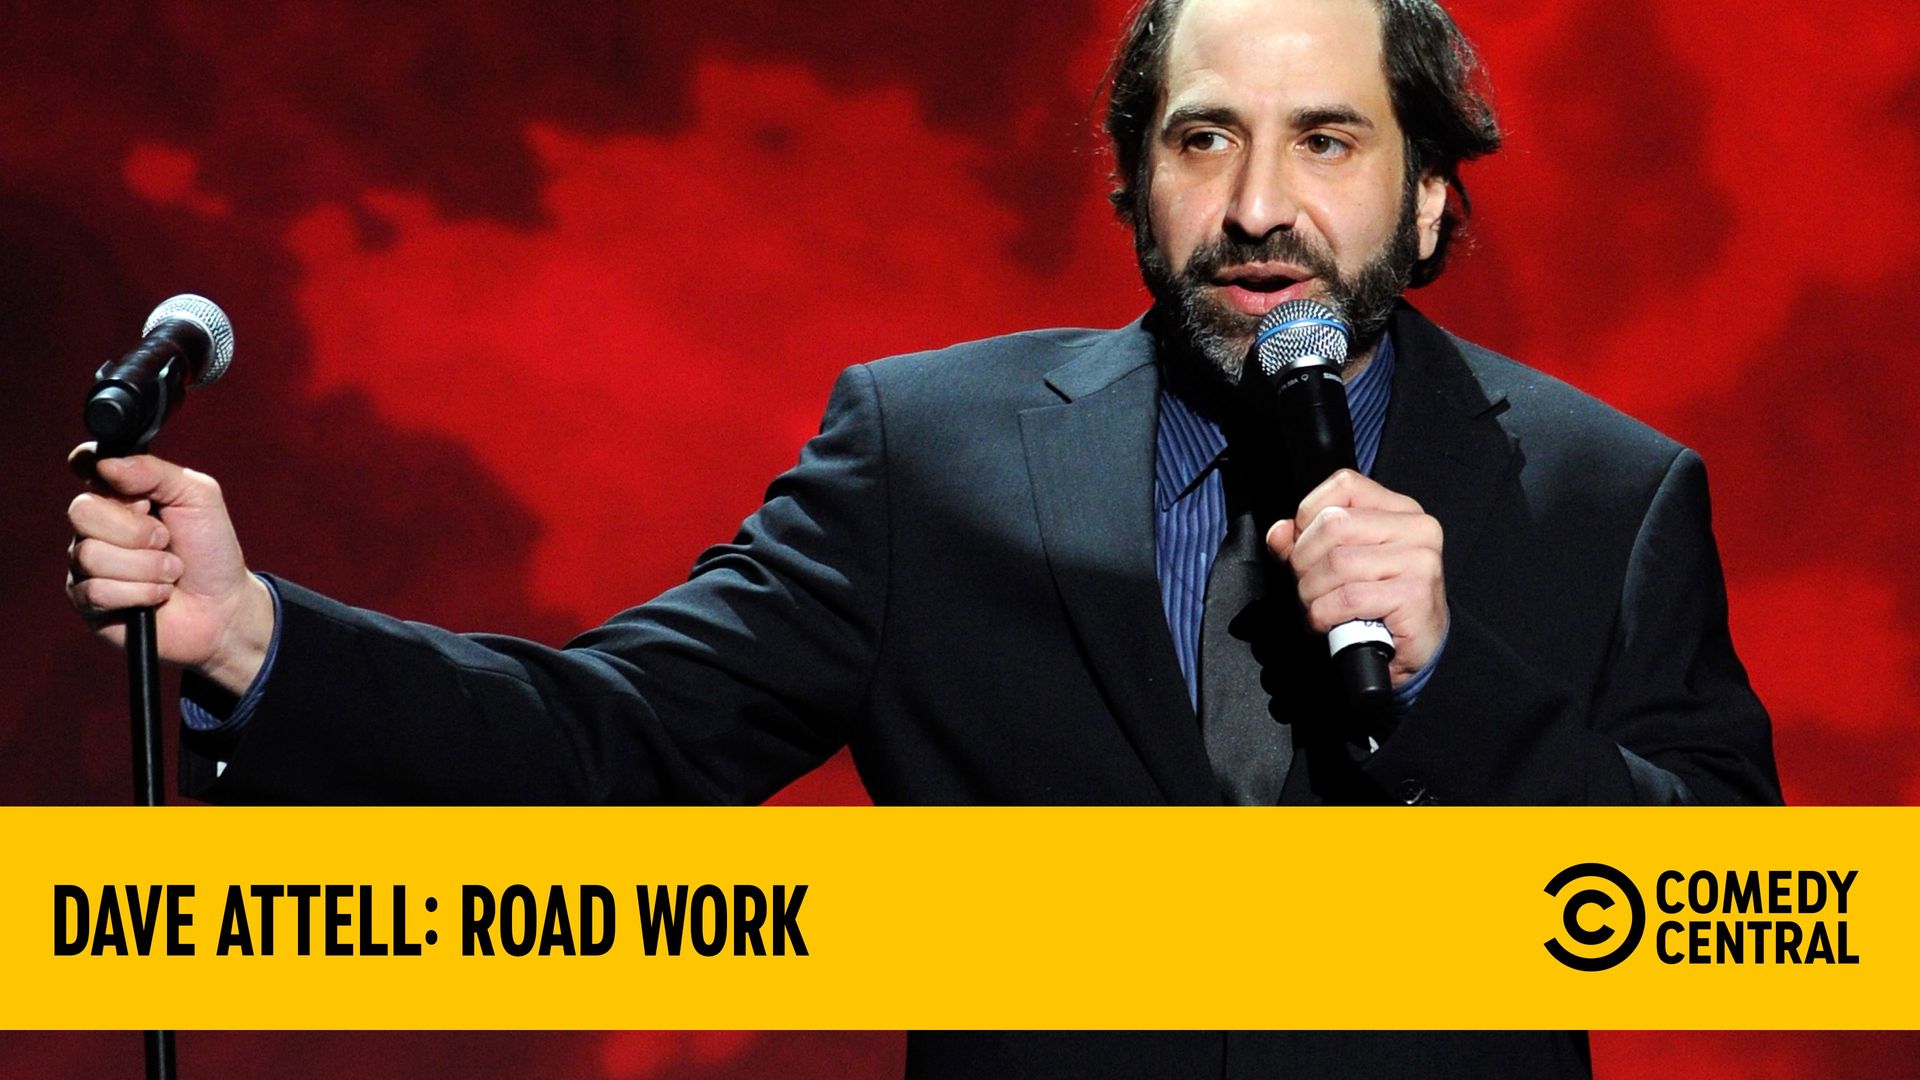 Dave Attell: Road Work Backdrop